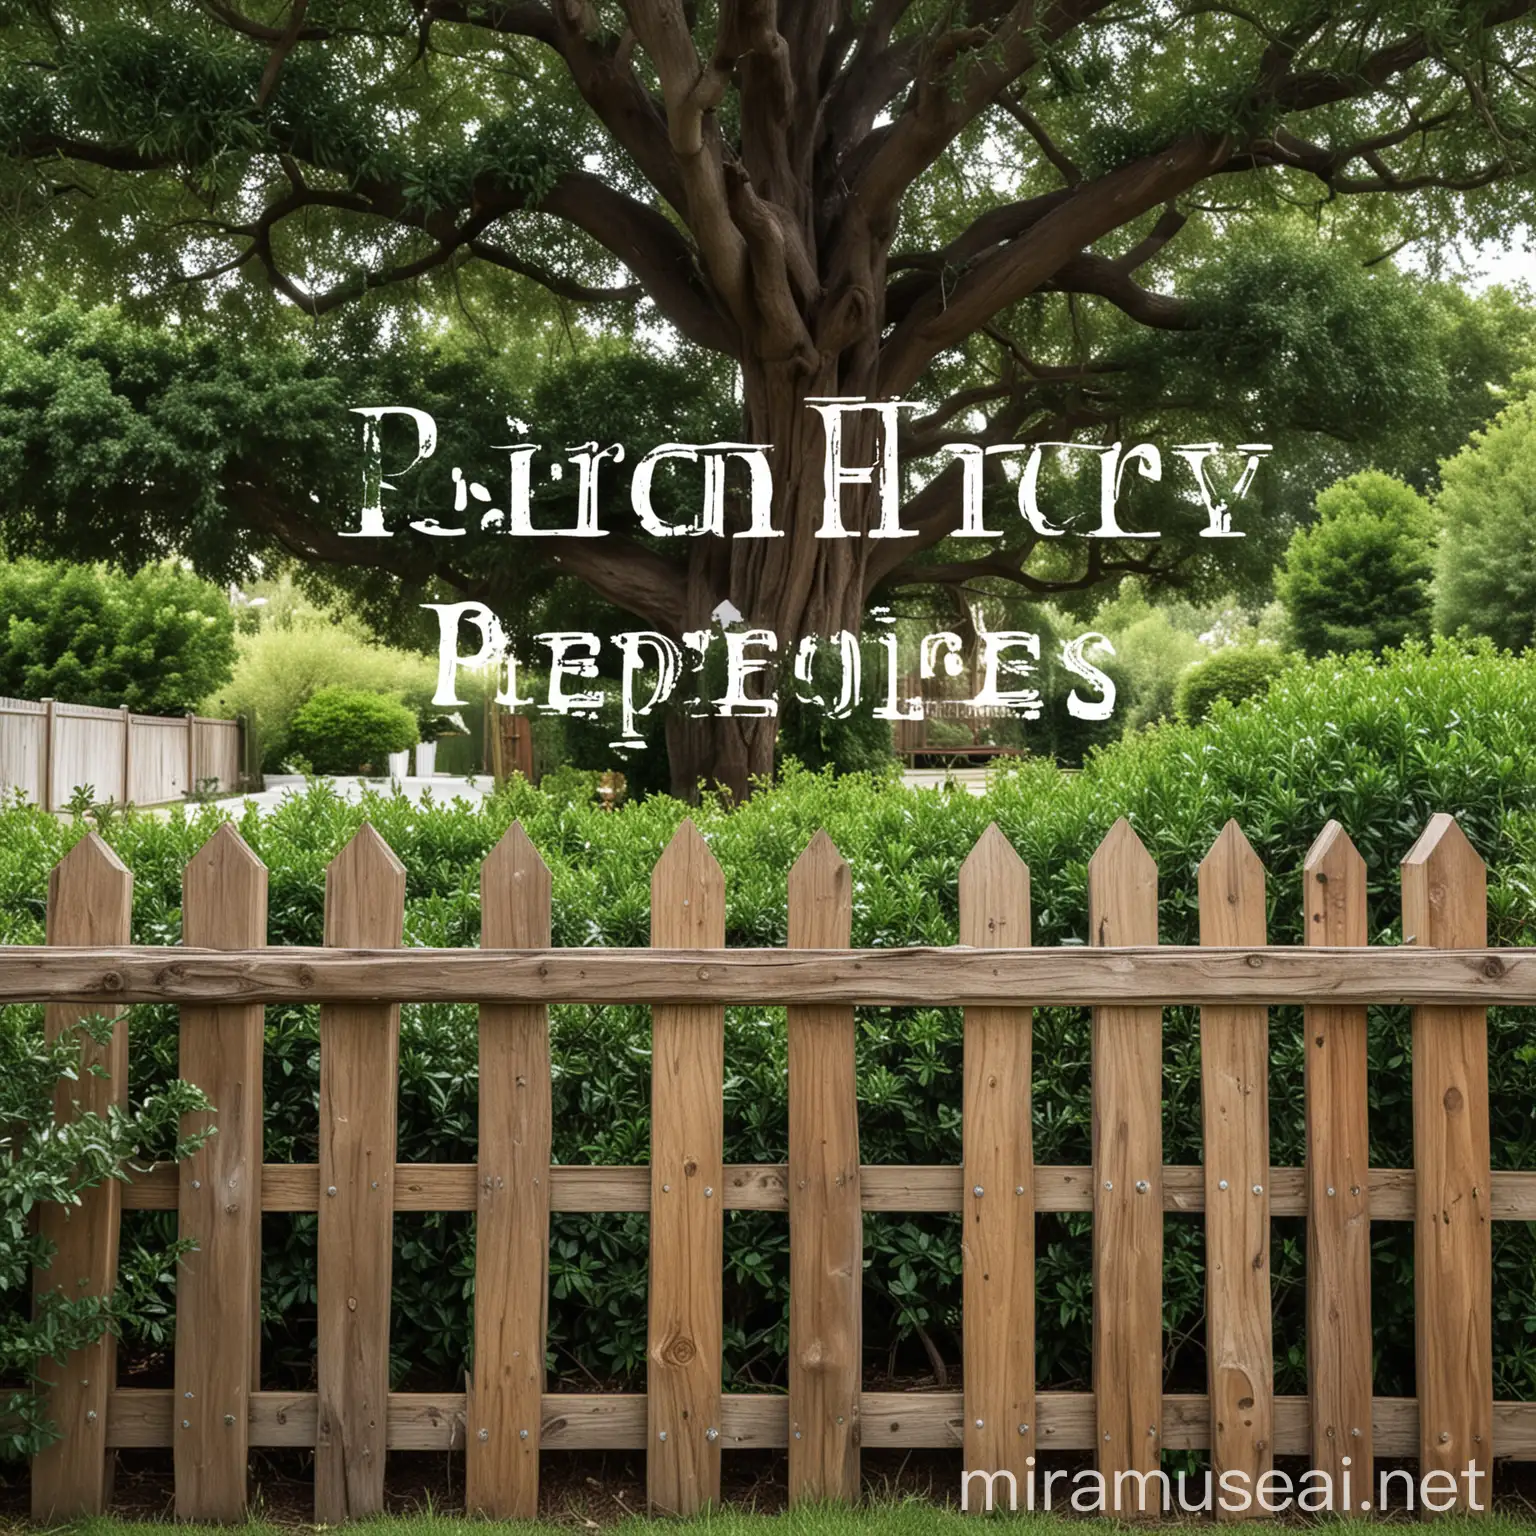 Please create a logo using a wooden fence in the foreground, green bushes in front, and a large tree behind the fence. The colors of the logo should be green and white. The text should read "Periphery Properties House".